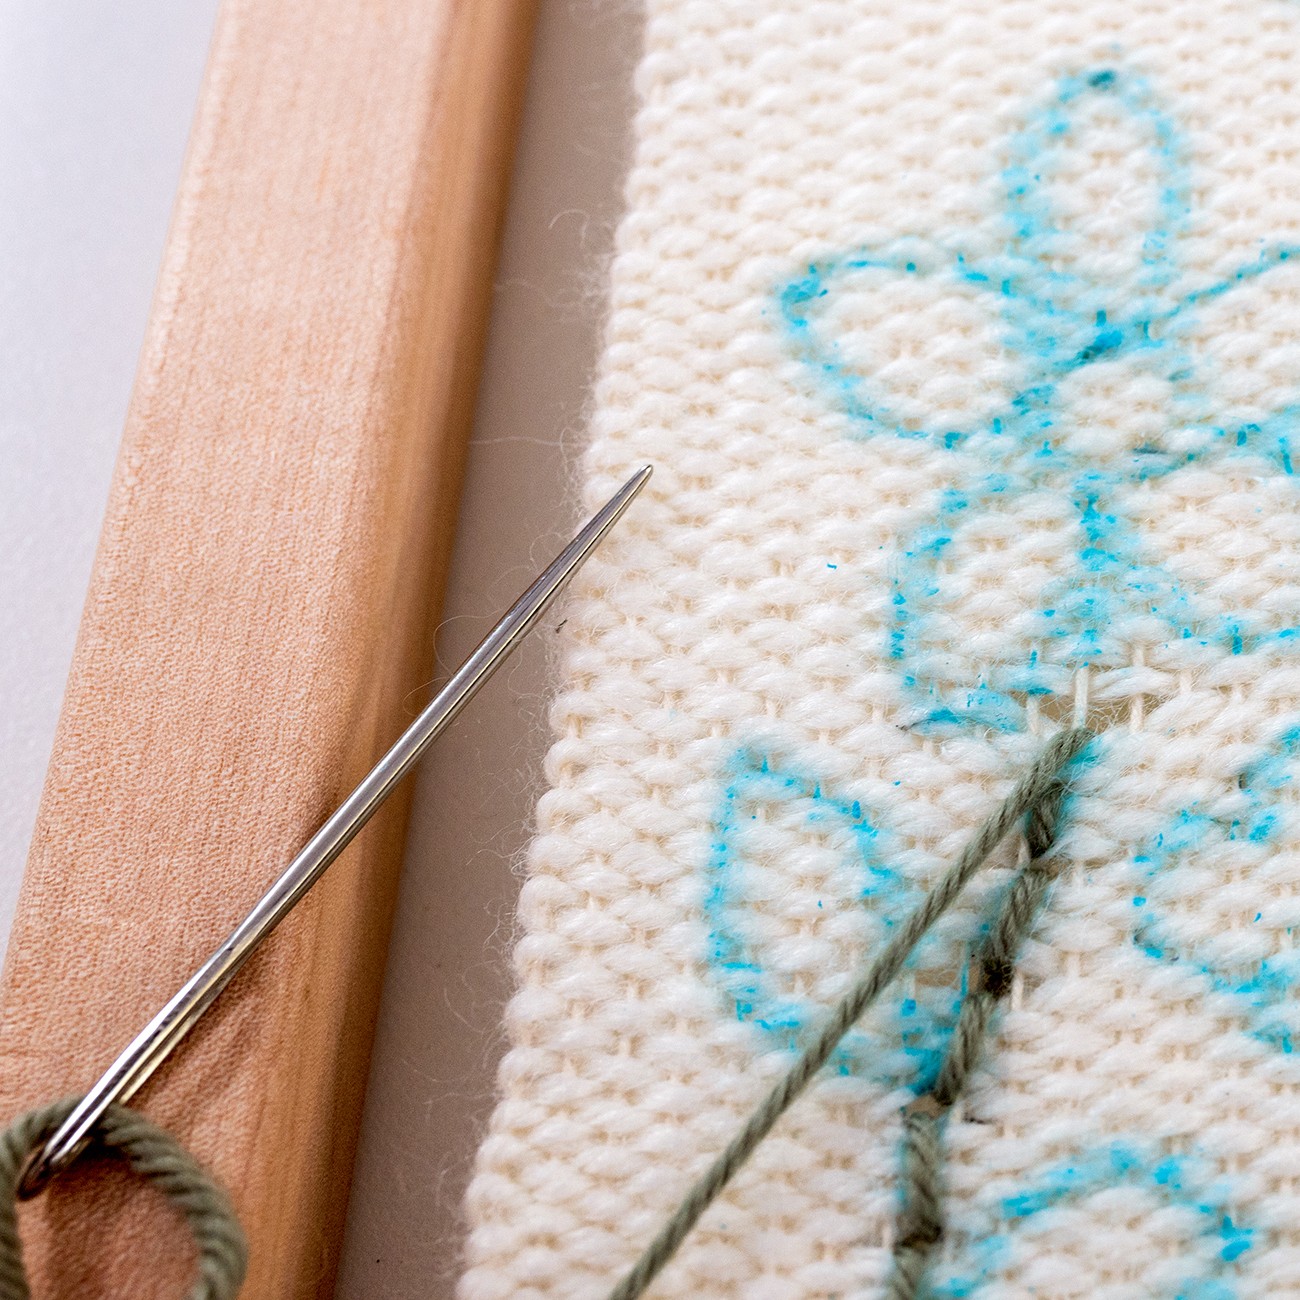 An embroidered bit of weaving is pulled too tight, exposing a gap in the wool.